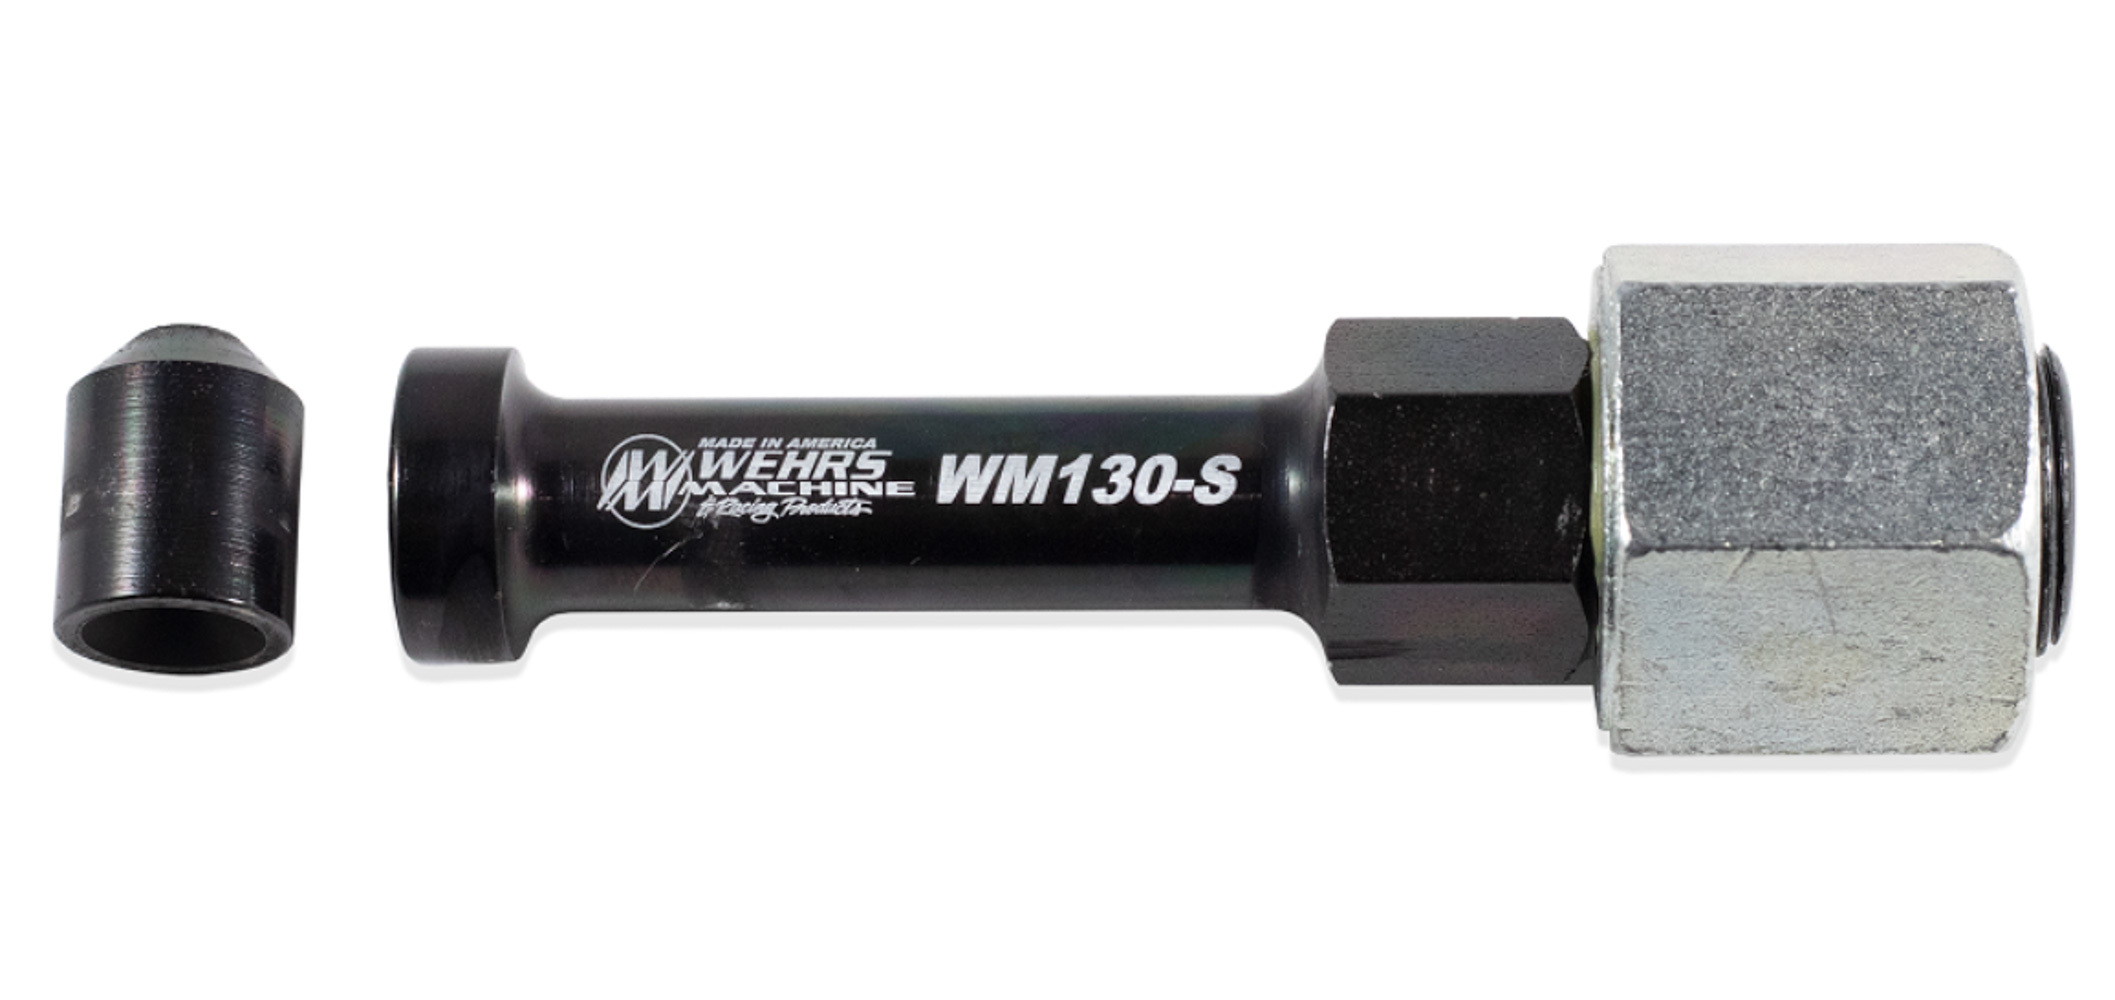 Wehrs Machine WM130-S Ball Joint Spreader Tool, 3 Piece Spindle, Steel, Black Paint, Kit